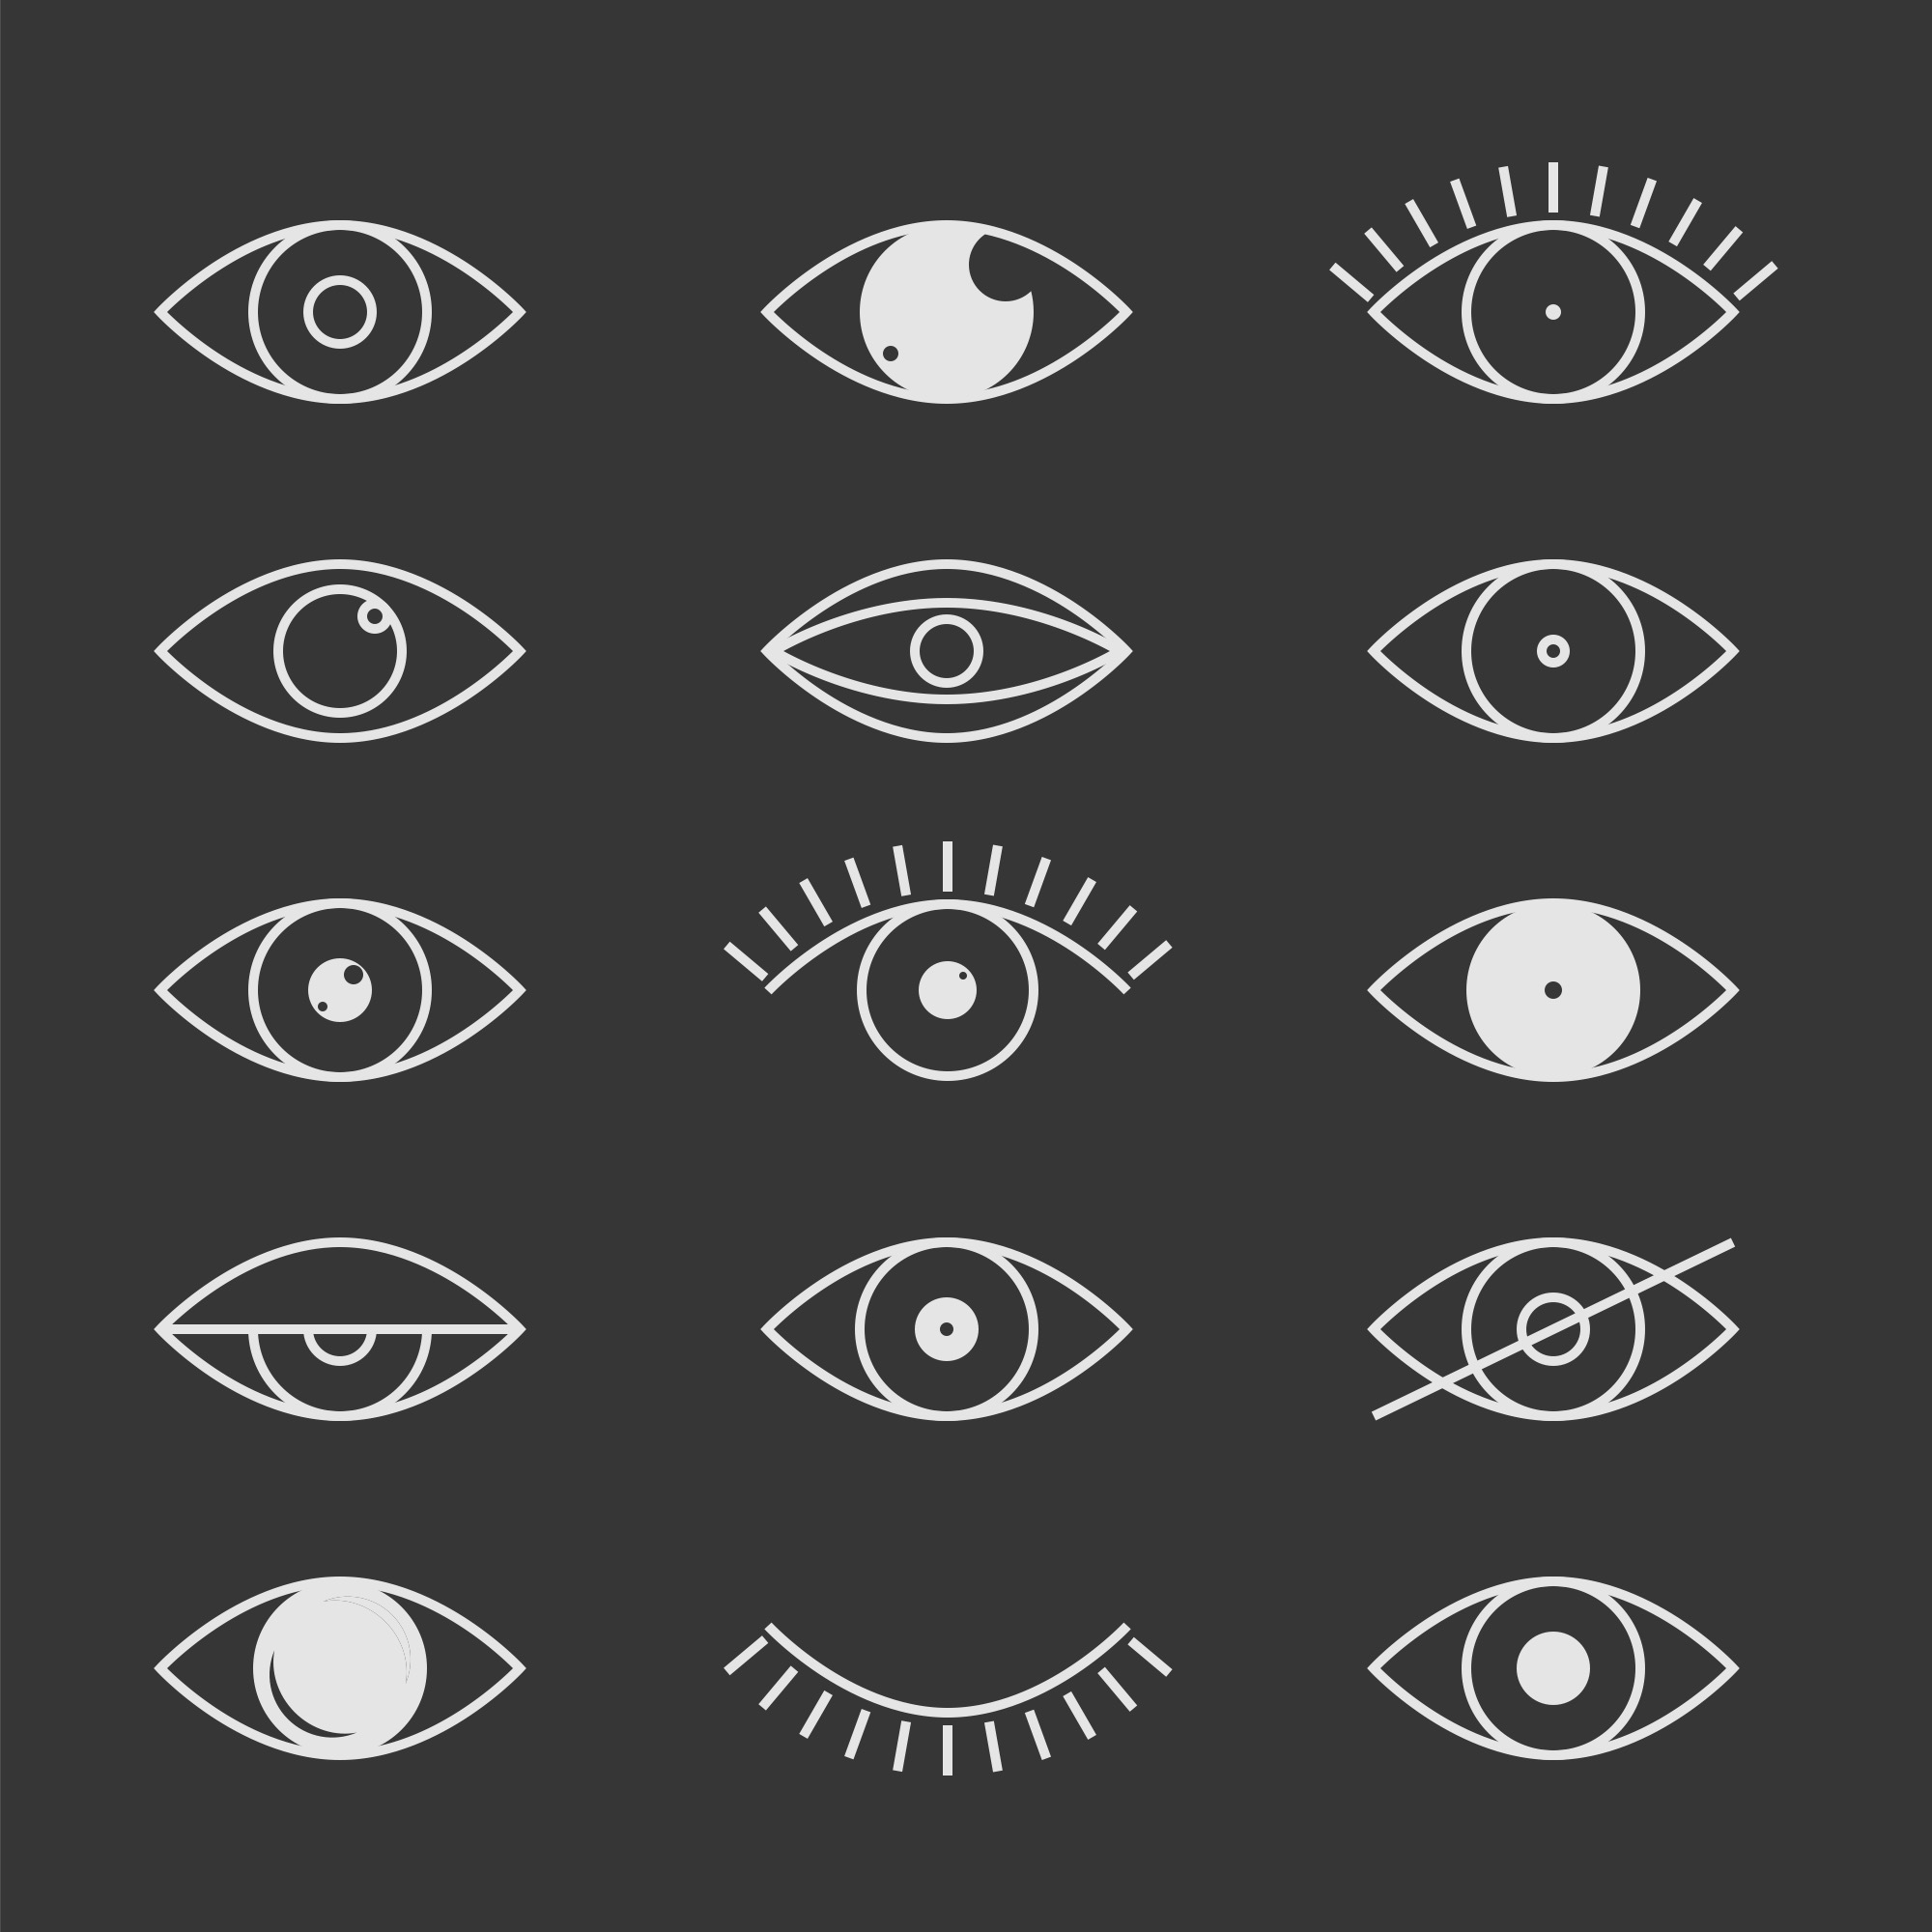 Fifteen small Illustrations of stylized eyes.